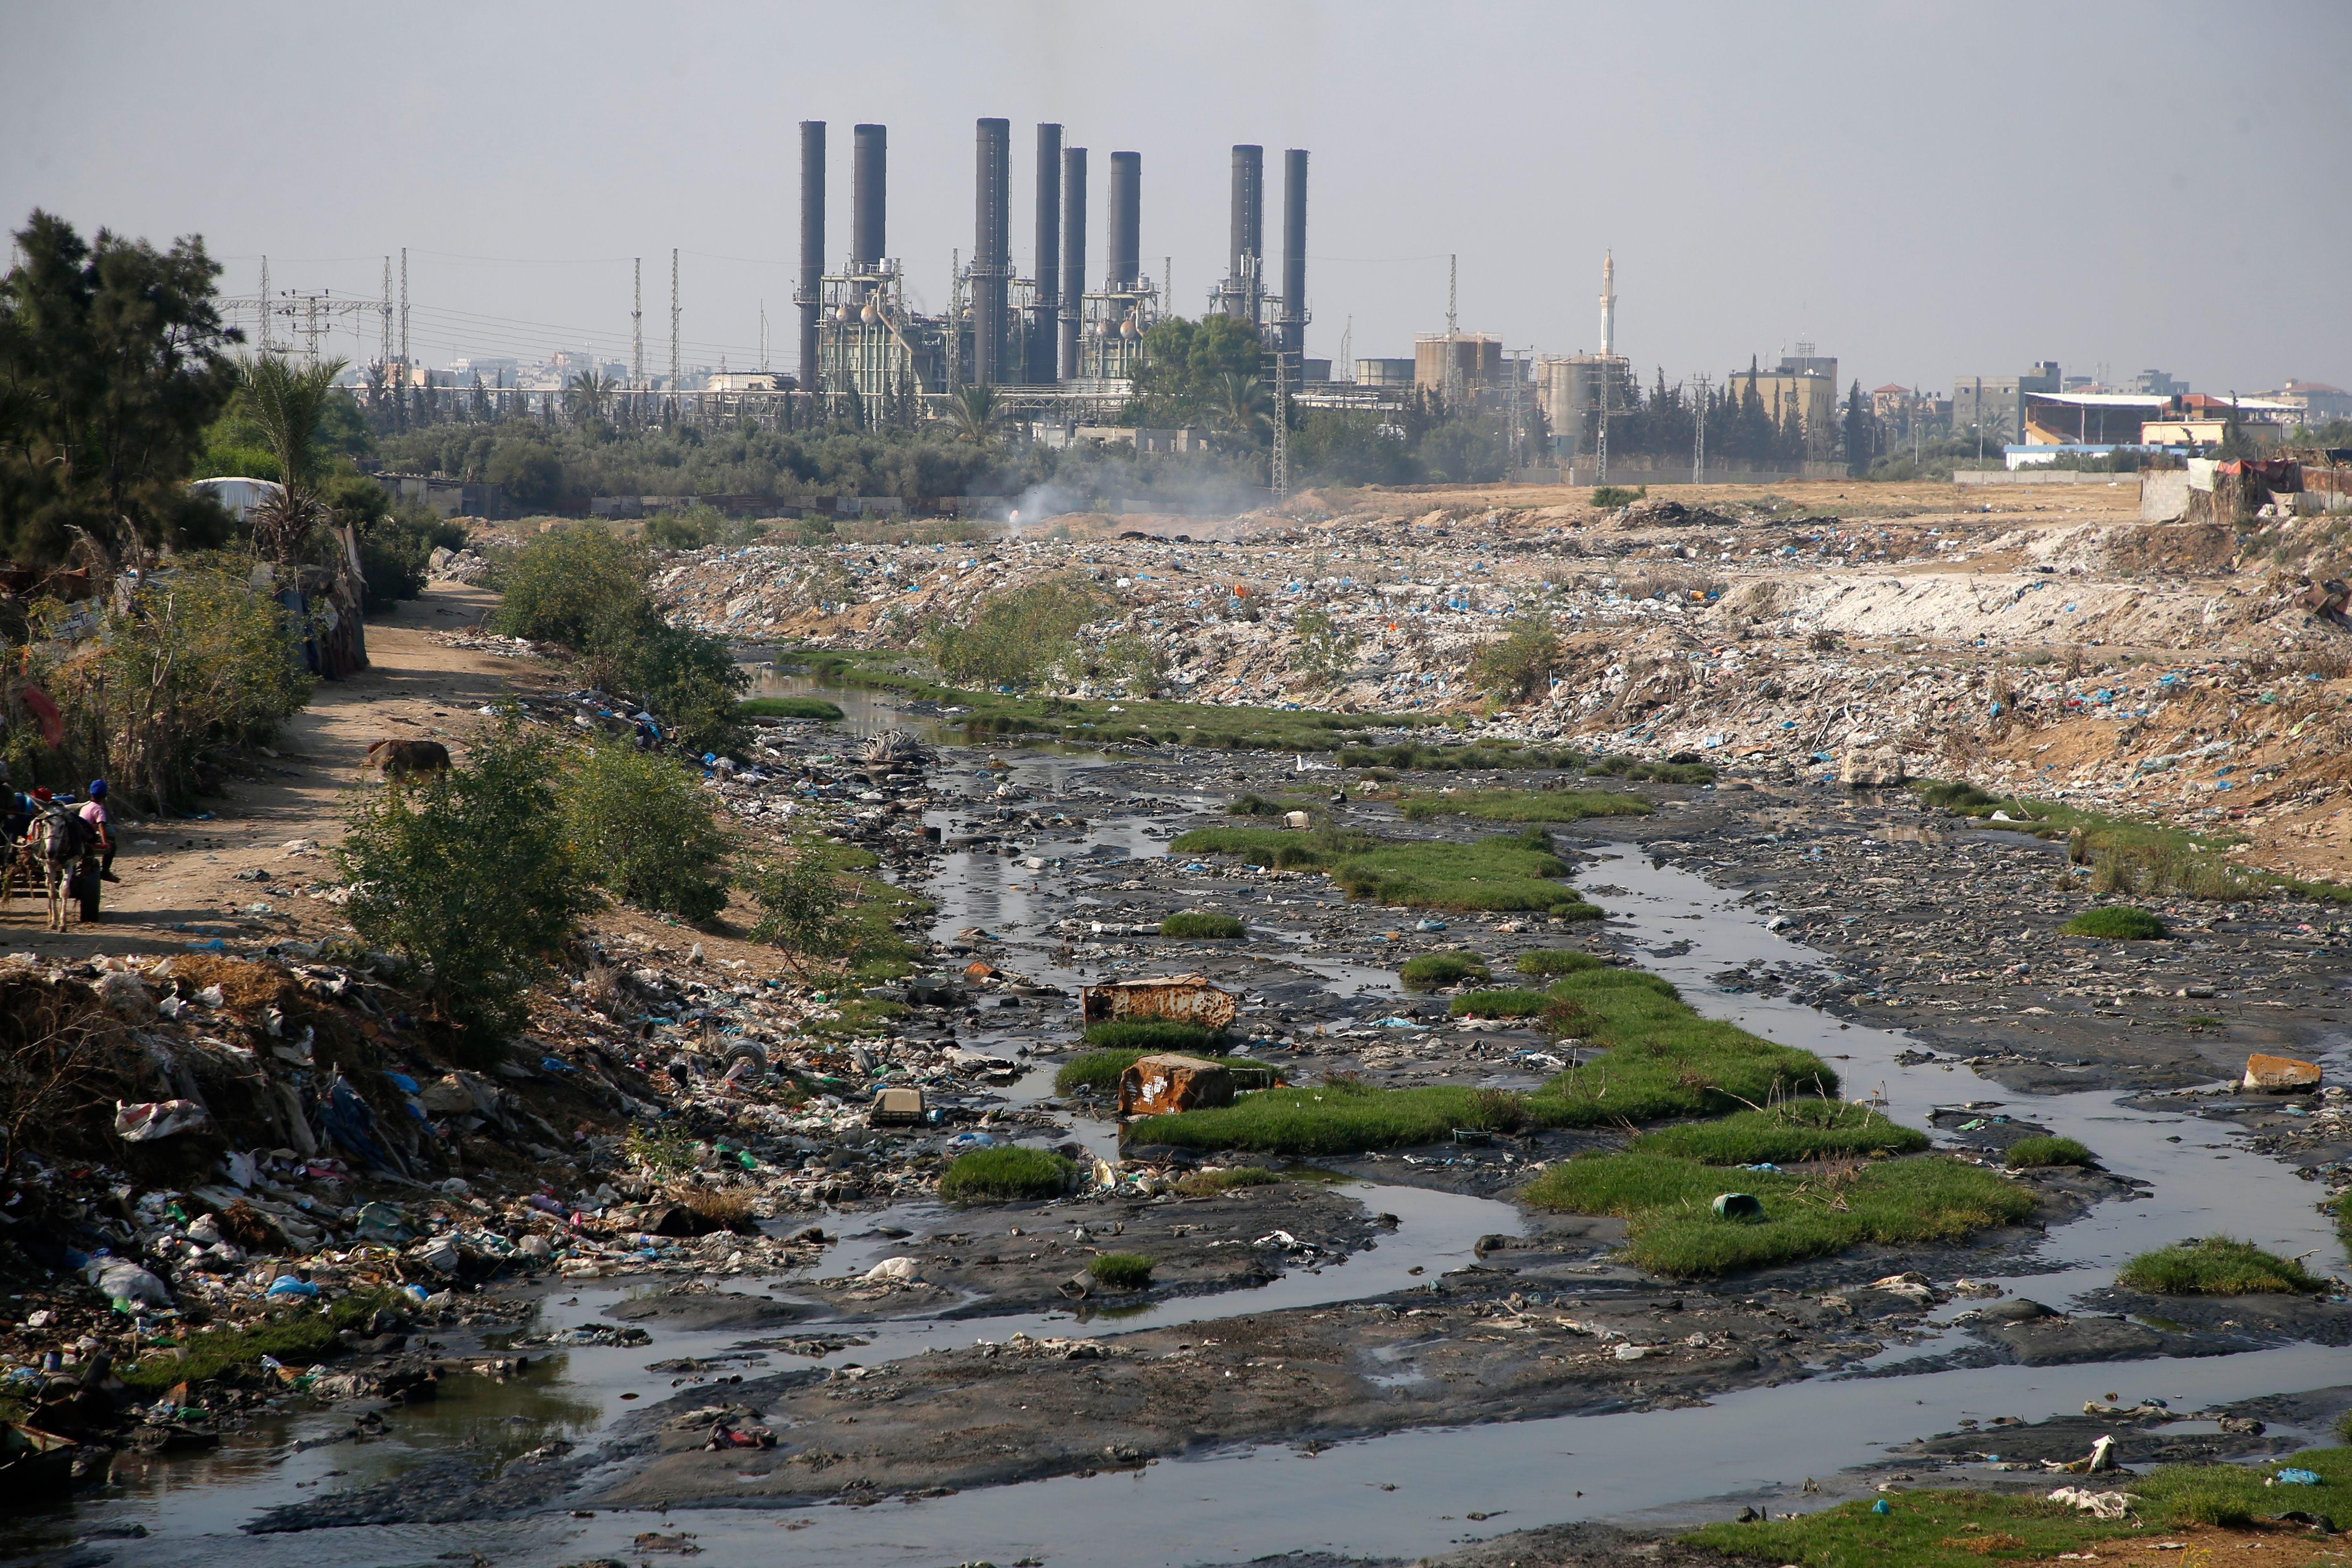 Raw sewage flowing near the main Gaza Strip power plant, serving the Hamas-run Palestinian occupied territories, south of Gaza City in 2019